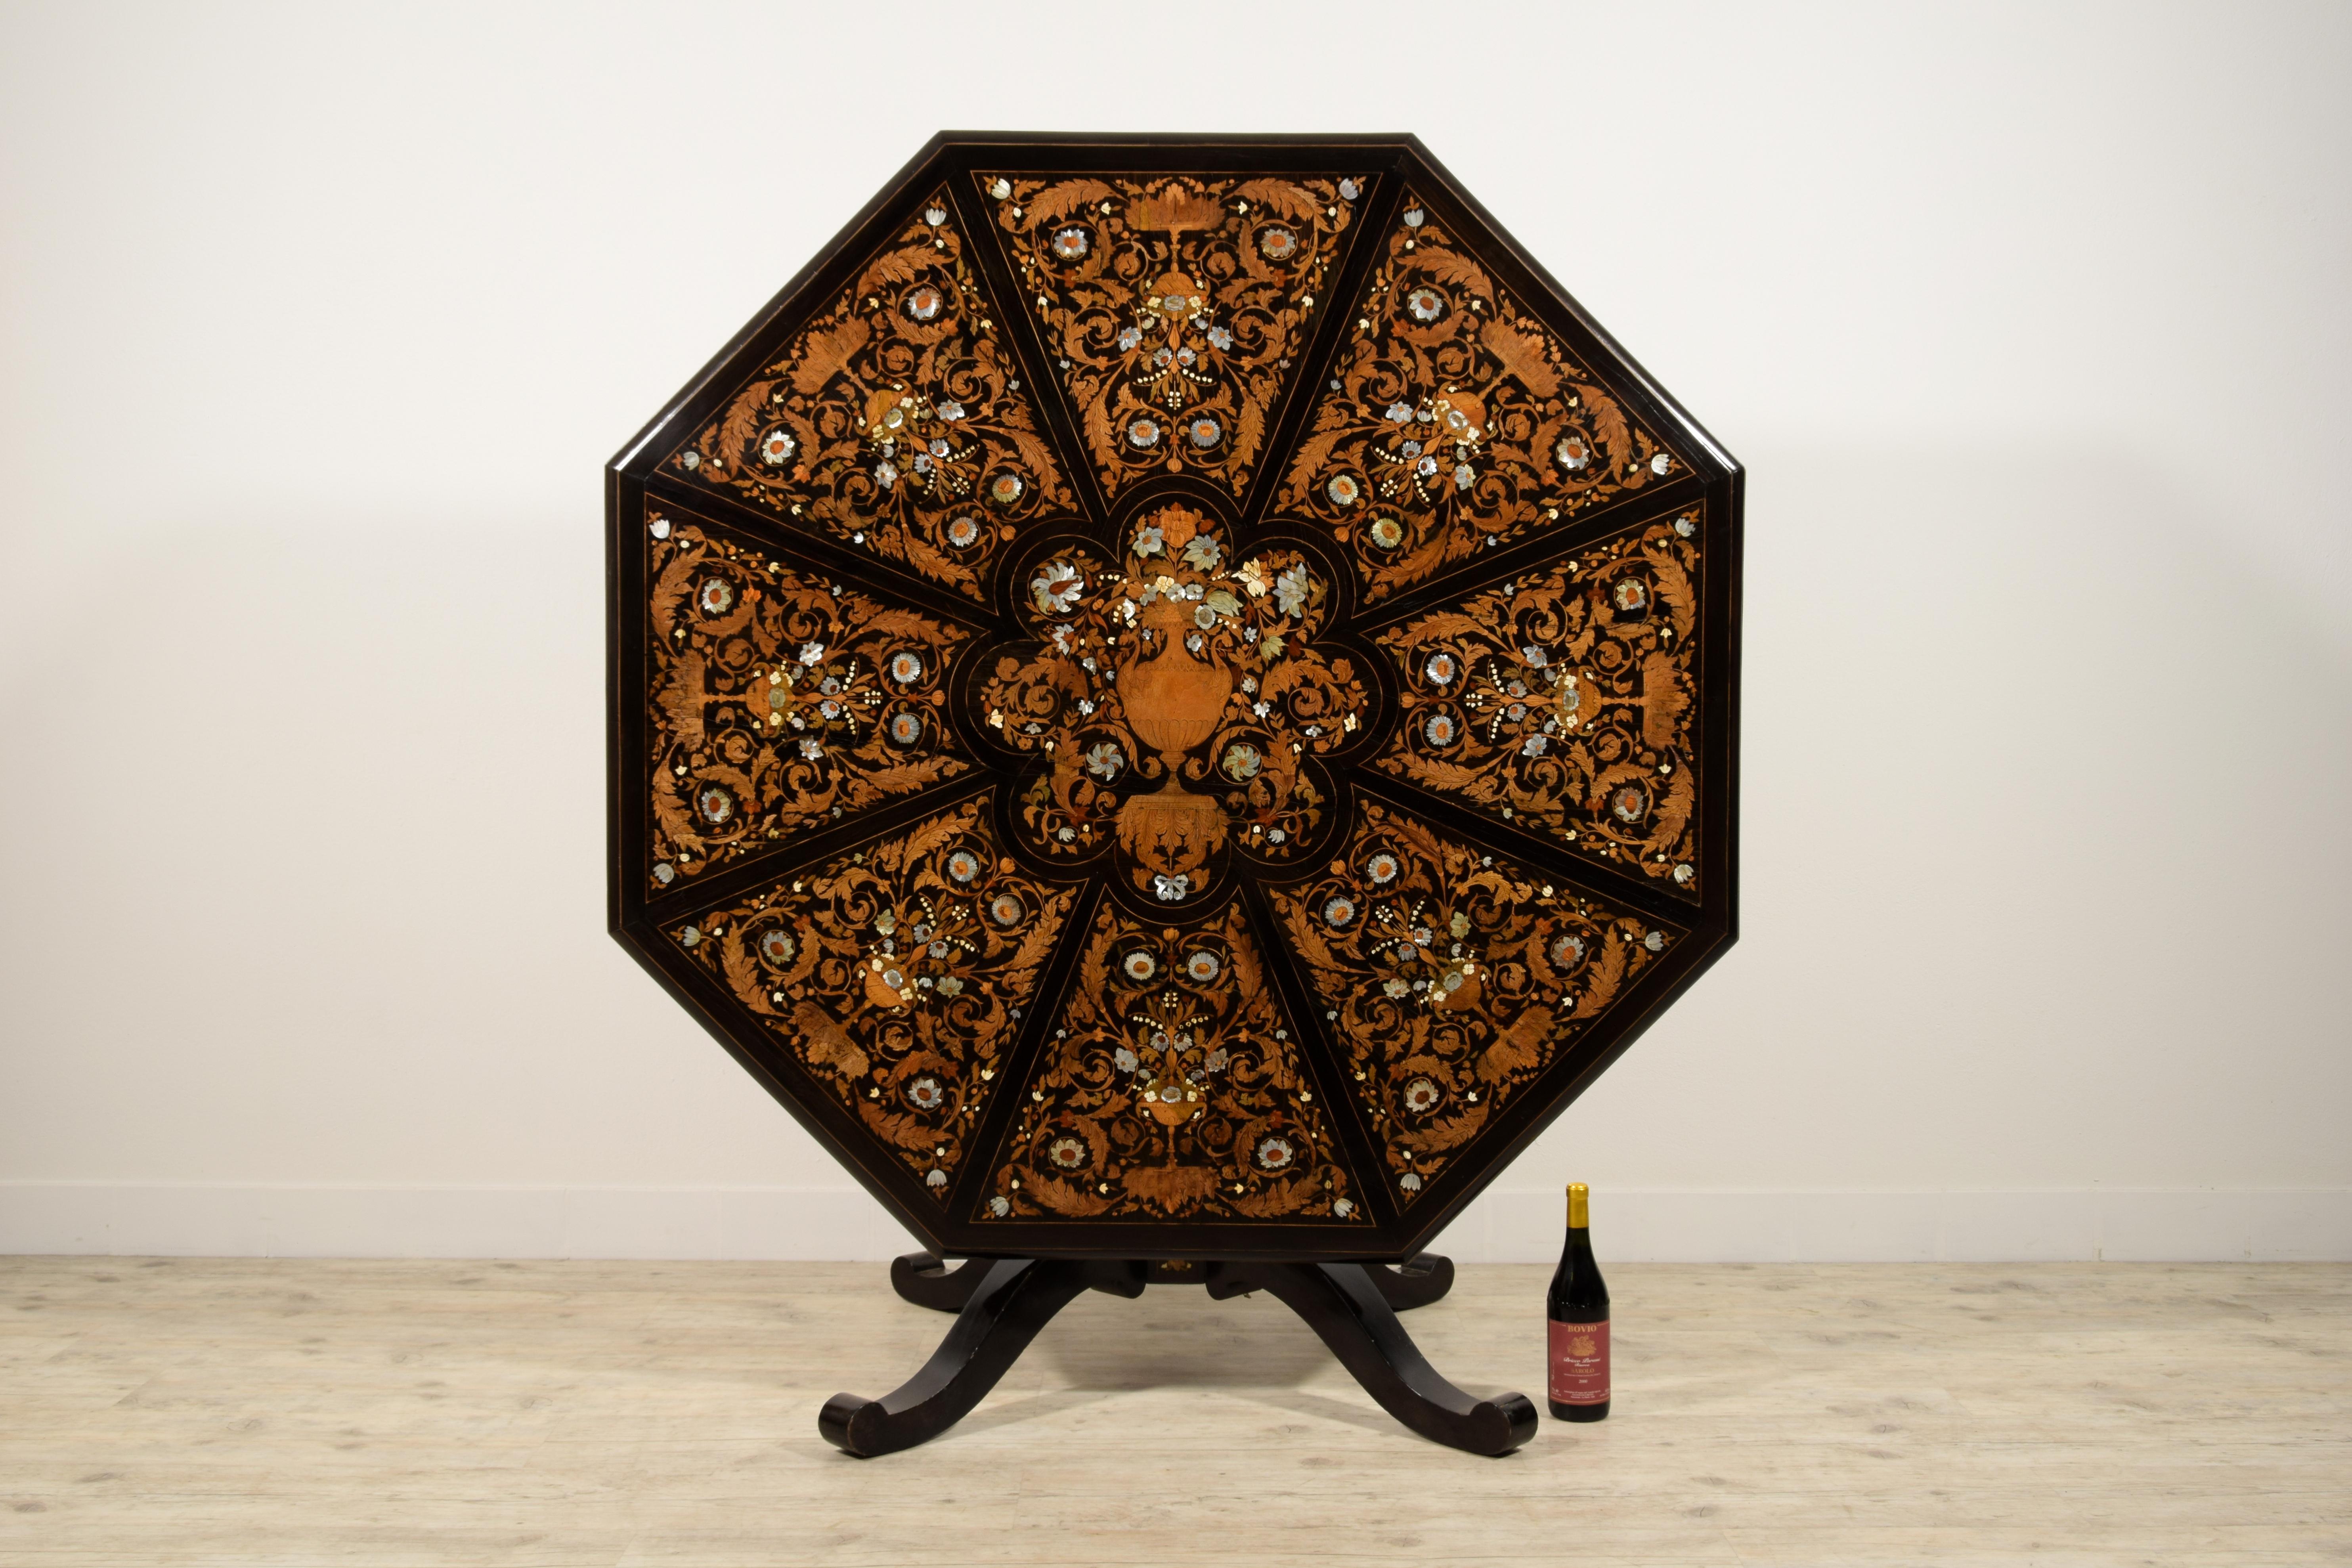 19th century, Italian octagonal sail plan center table by Luigi and Angiolo Falcini

This large and important wooden center table consists of a octagonal sail top finely inlaid in different woods. The inlays form some geometric and floral designs.